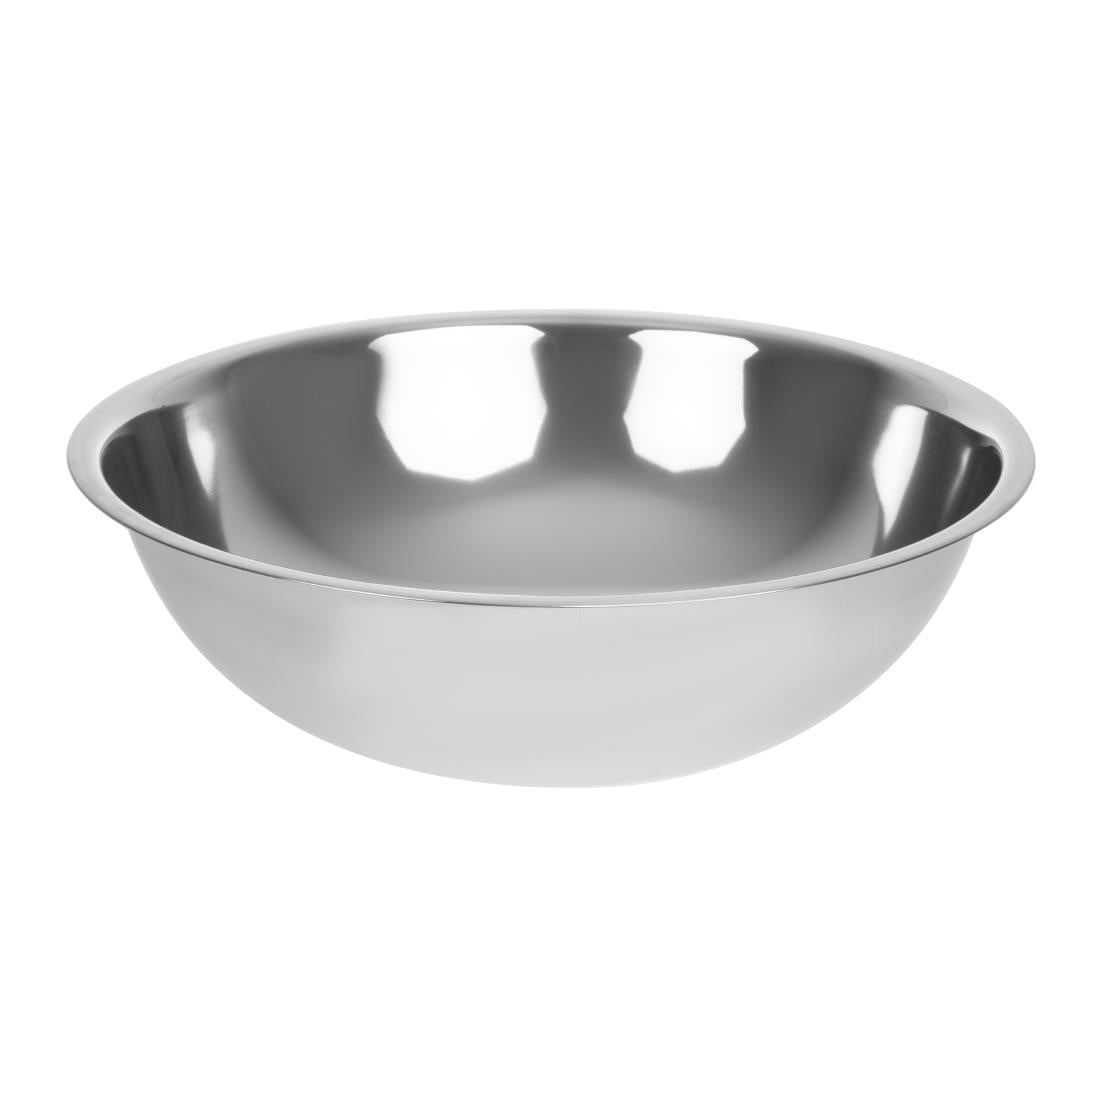 GC141 Vogue Stainless Steel Mixing Bowl 12Ltr JD Catering Equipment Solutions Ltd